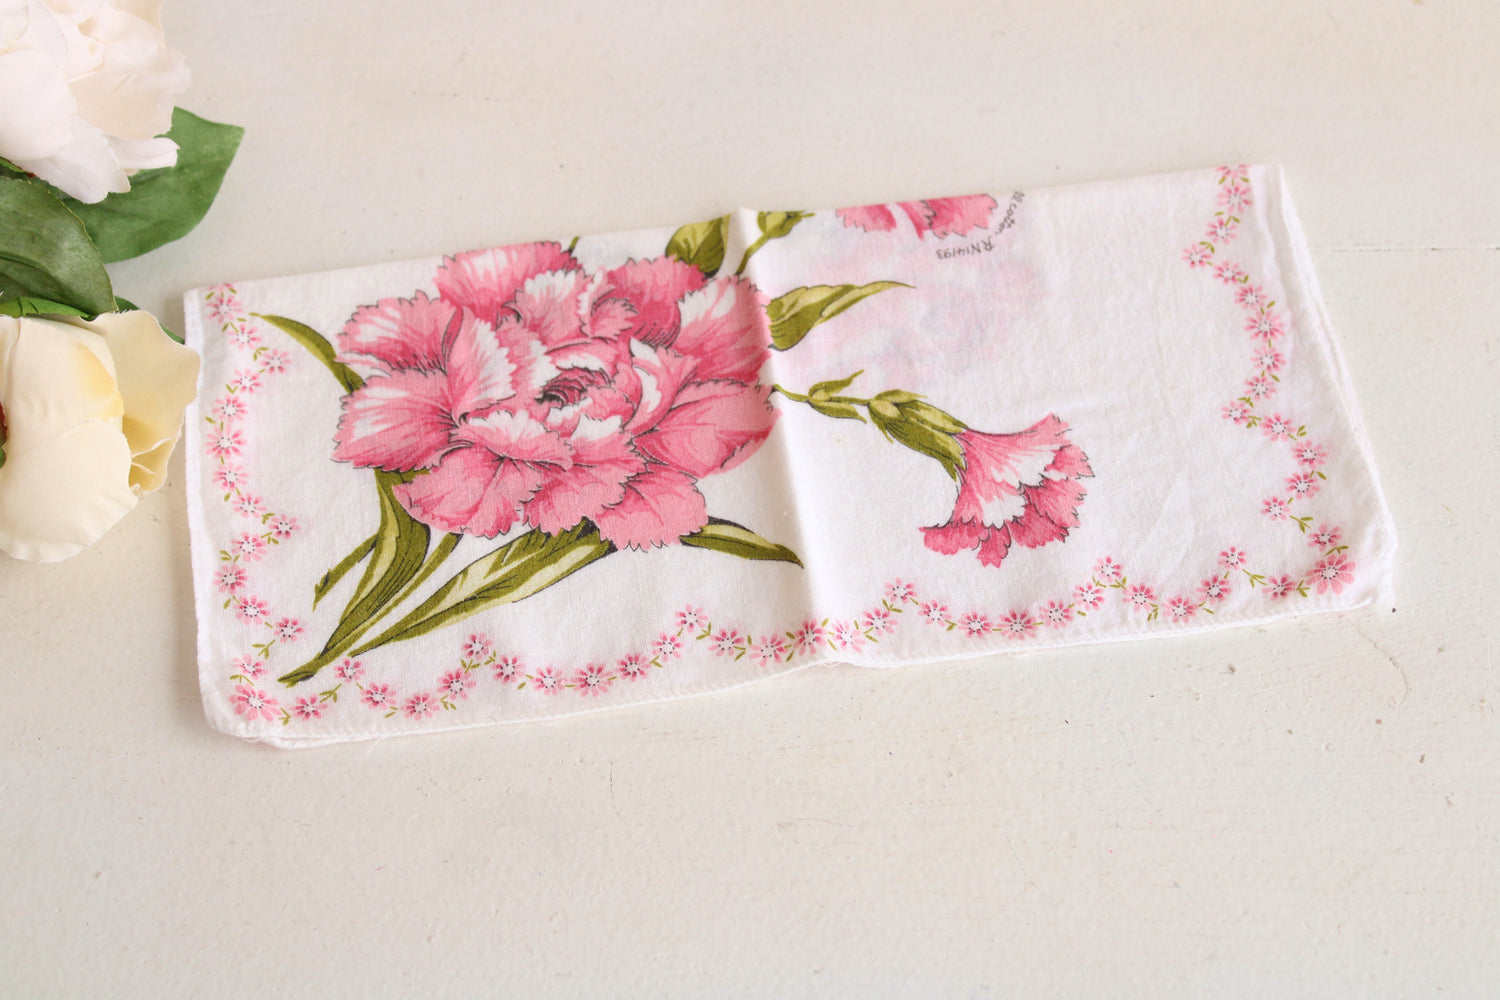 Lovely Floral Embroidered Hanky,Vintage Handkerchief, Pink Rose Buds,F